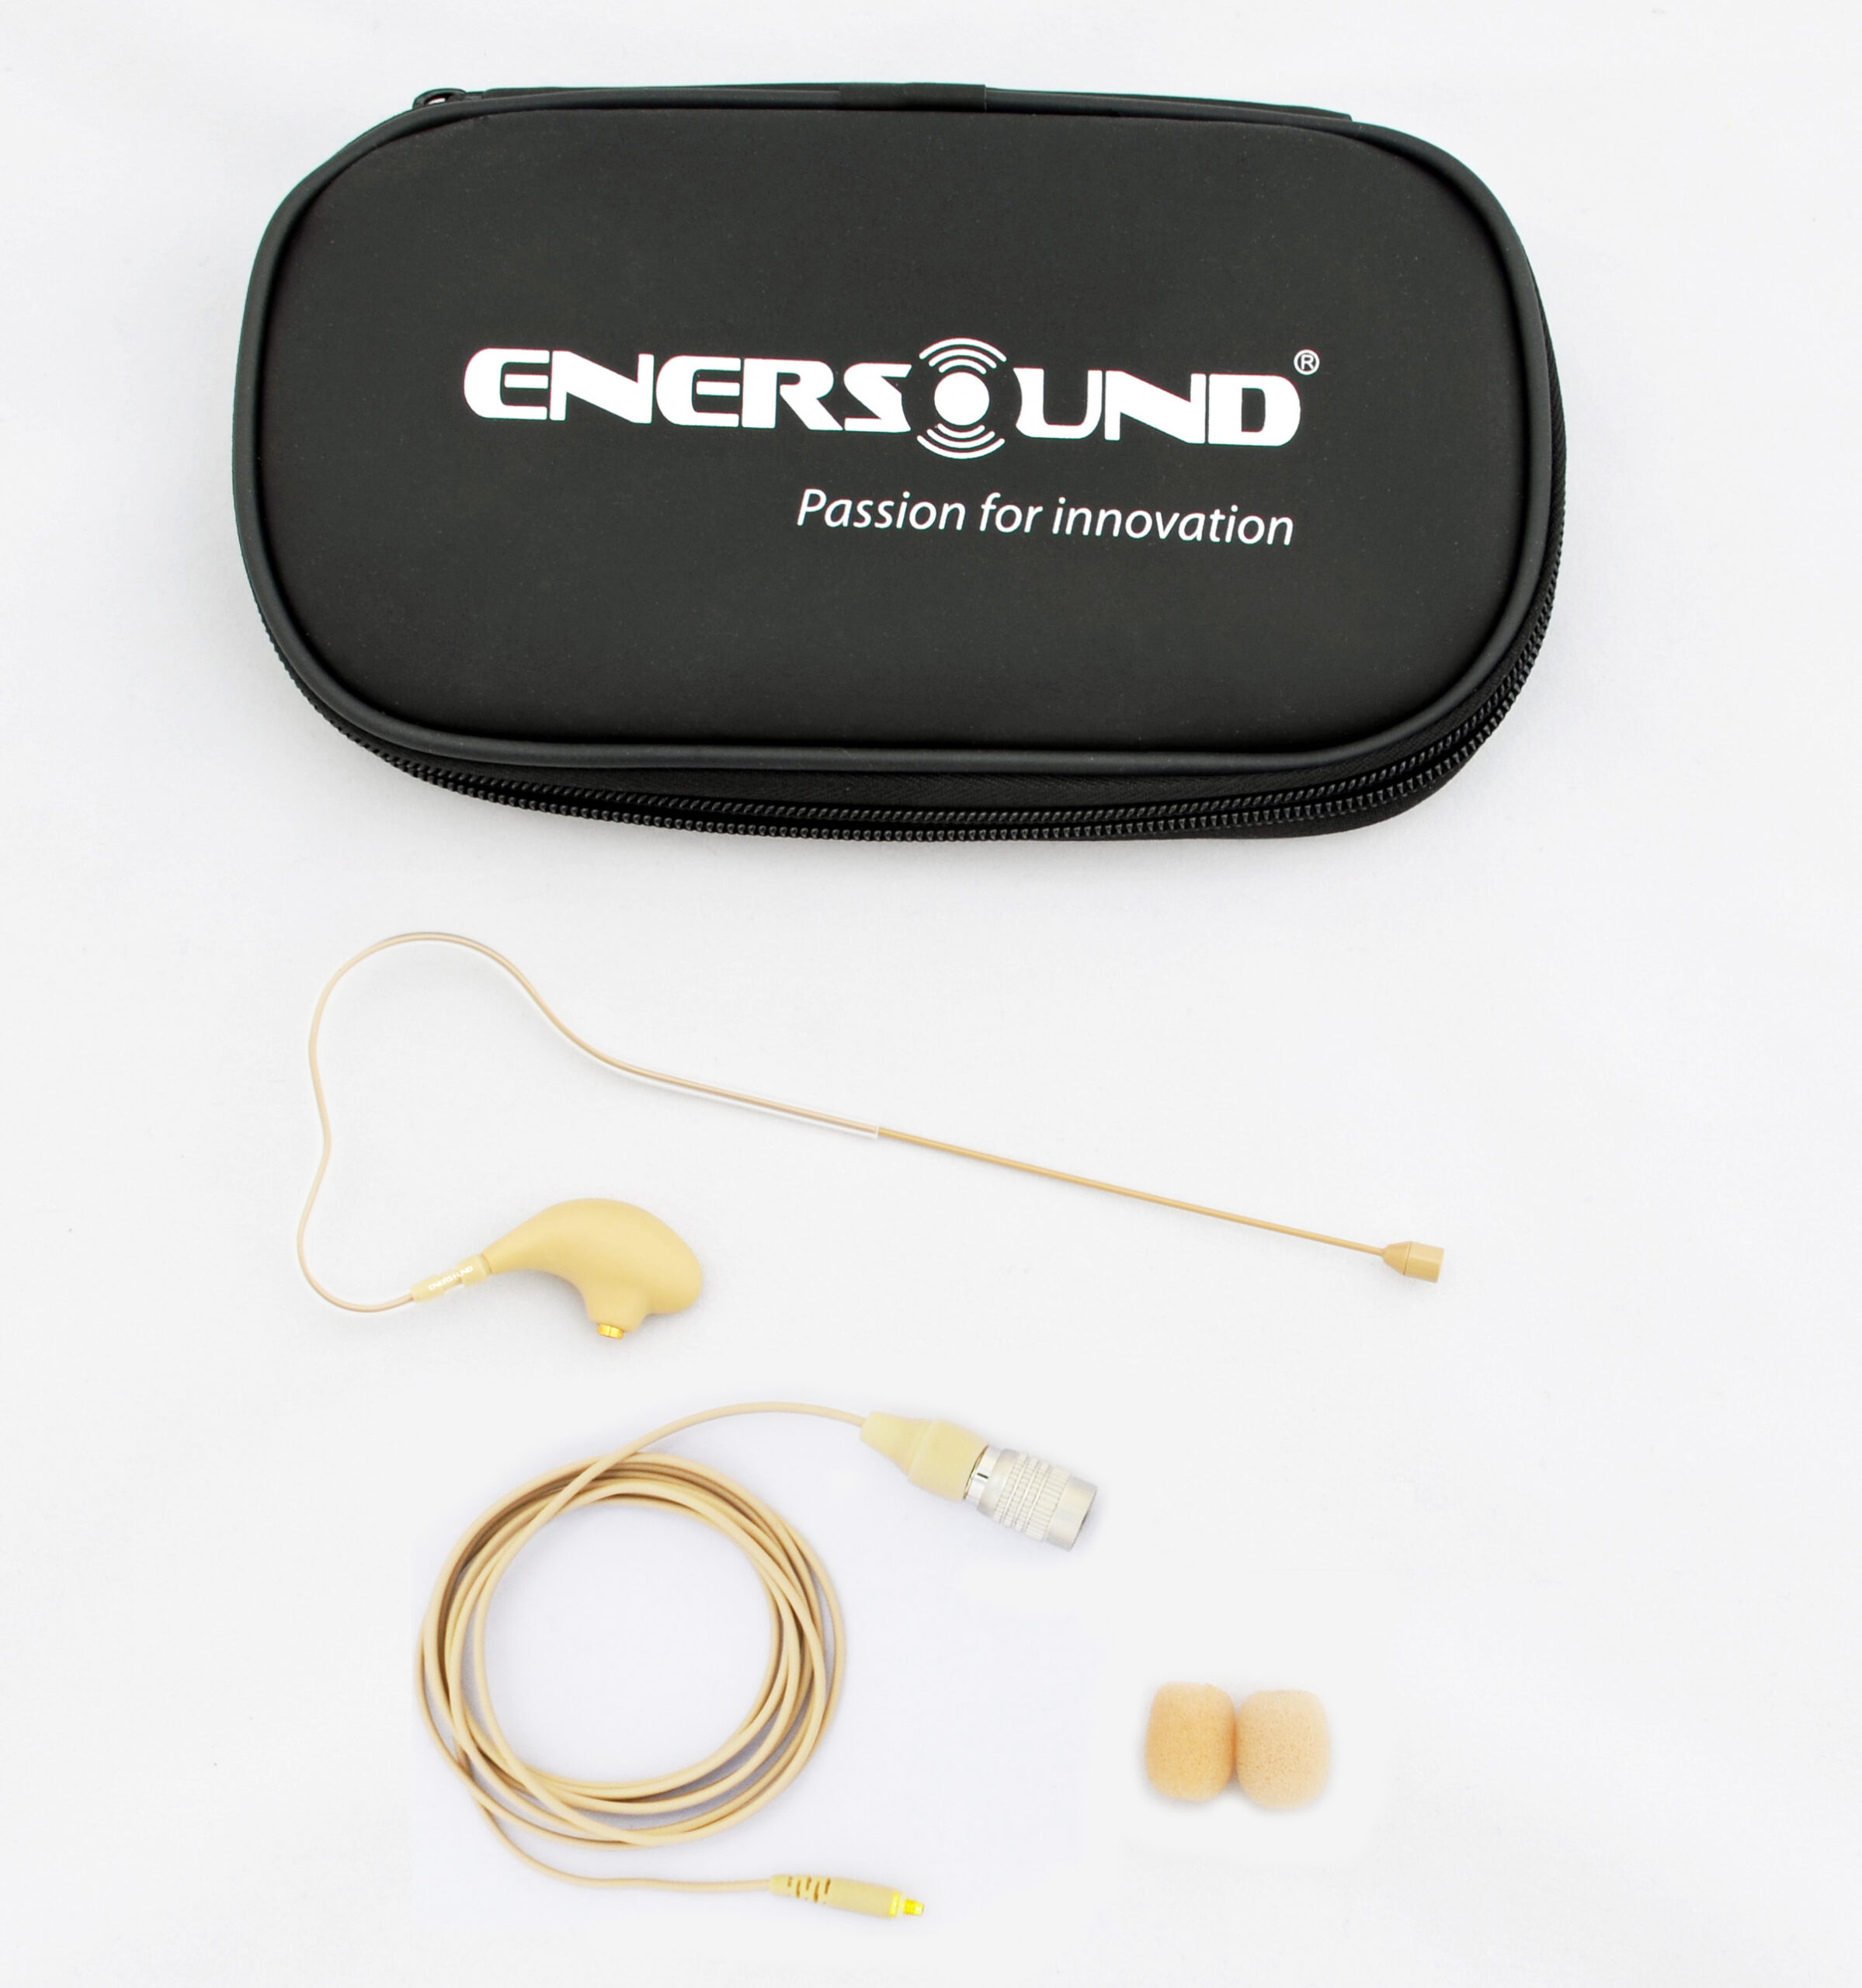 MIC-400 Pro Miniature Earset Microphone – Enersound